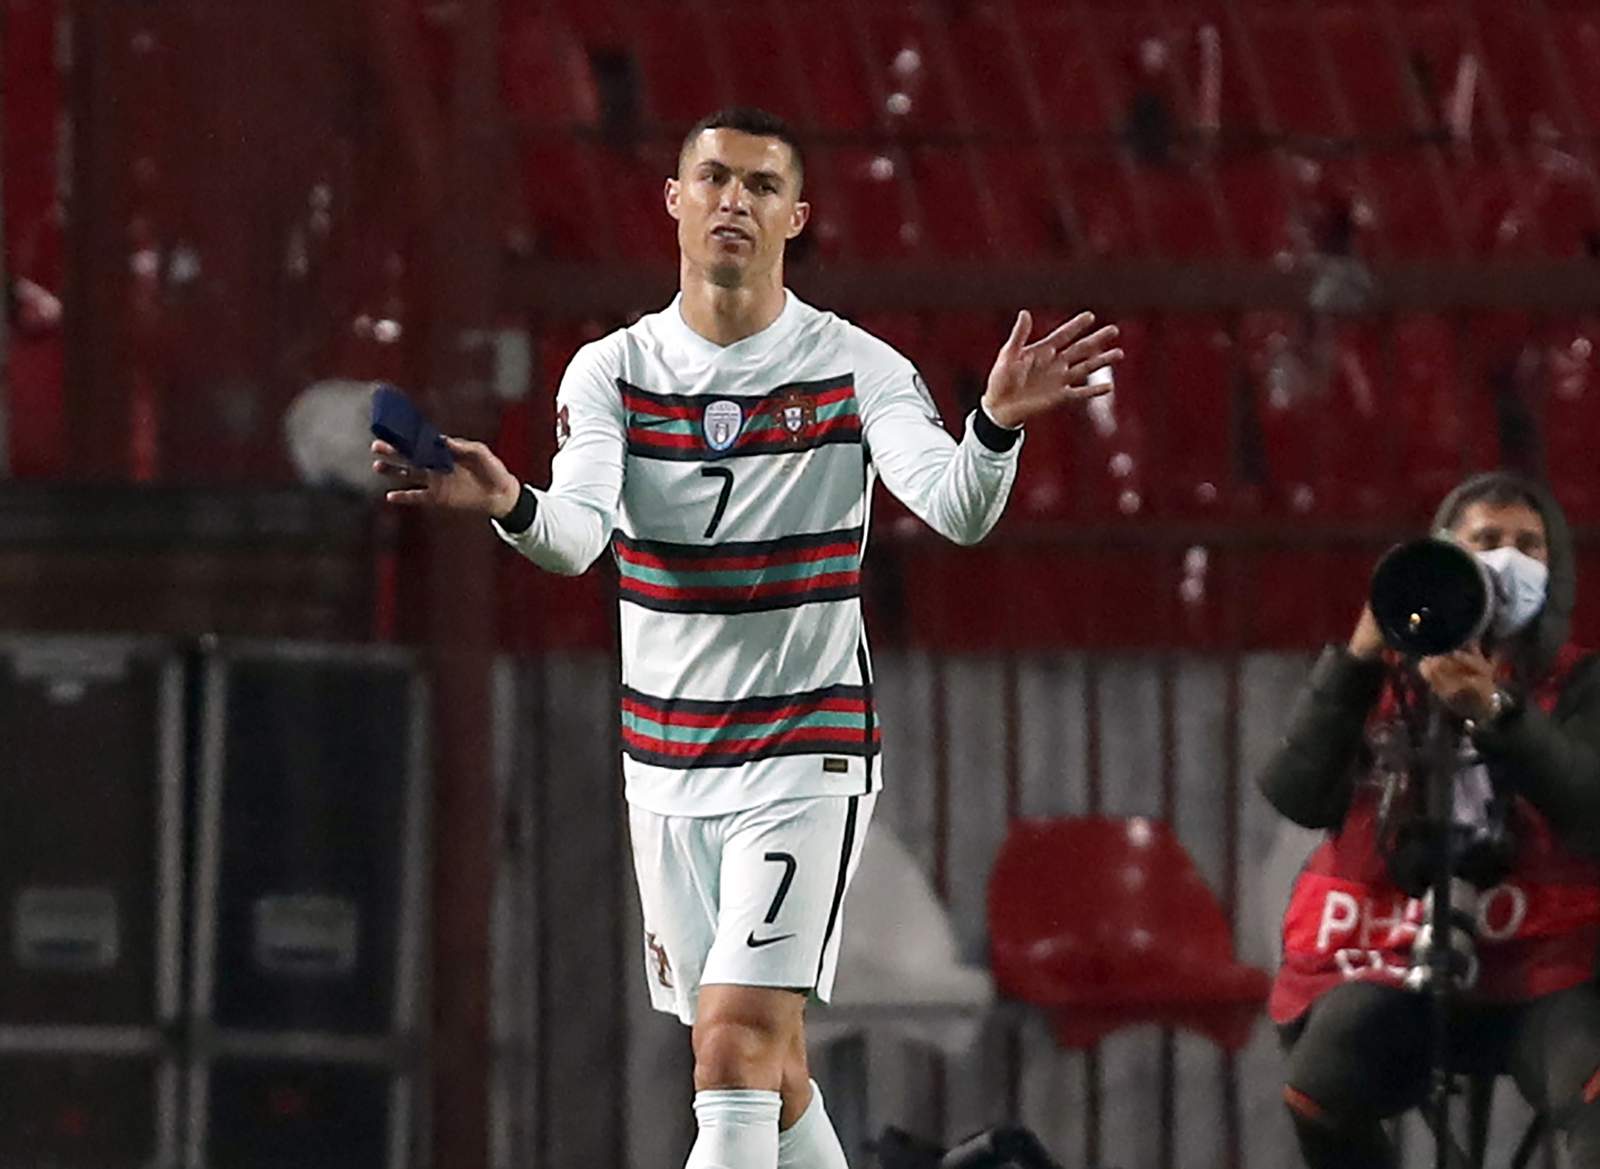 Ronaldo's armband auctioned for $75,000 to help Serbian baby